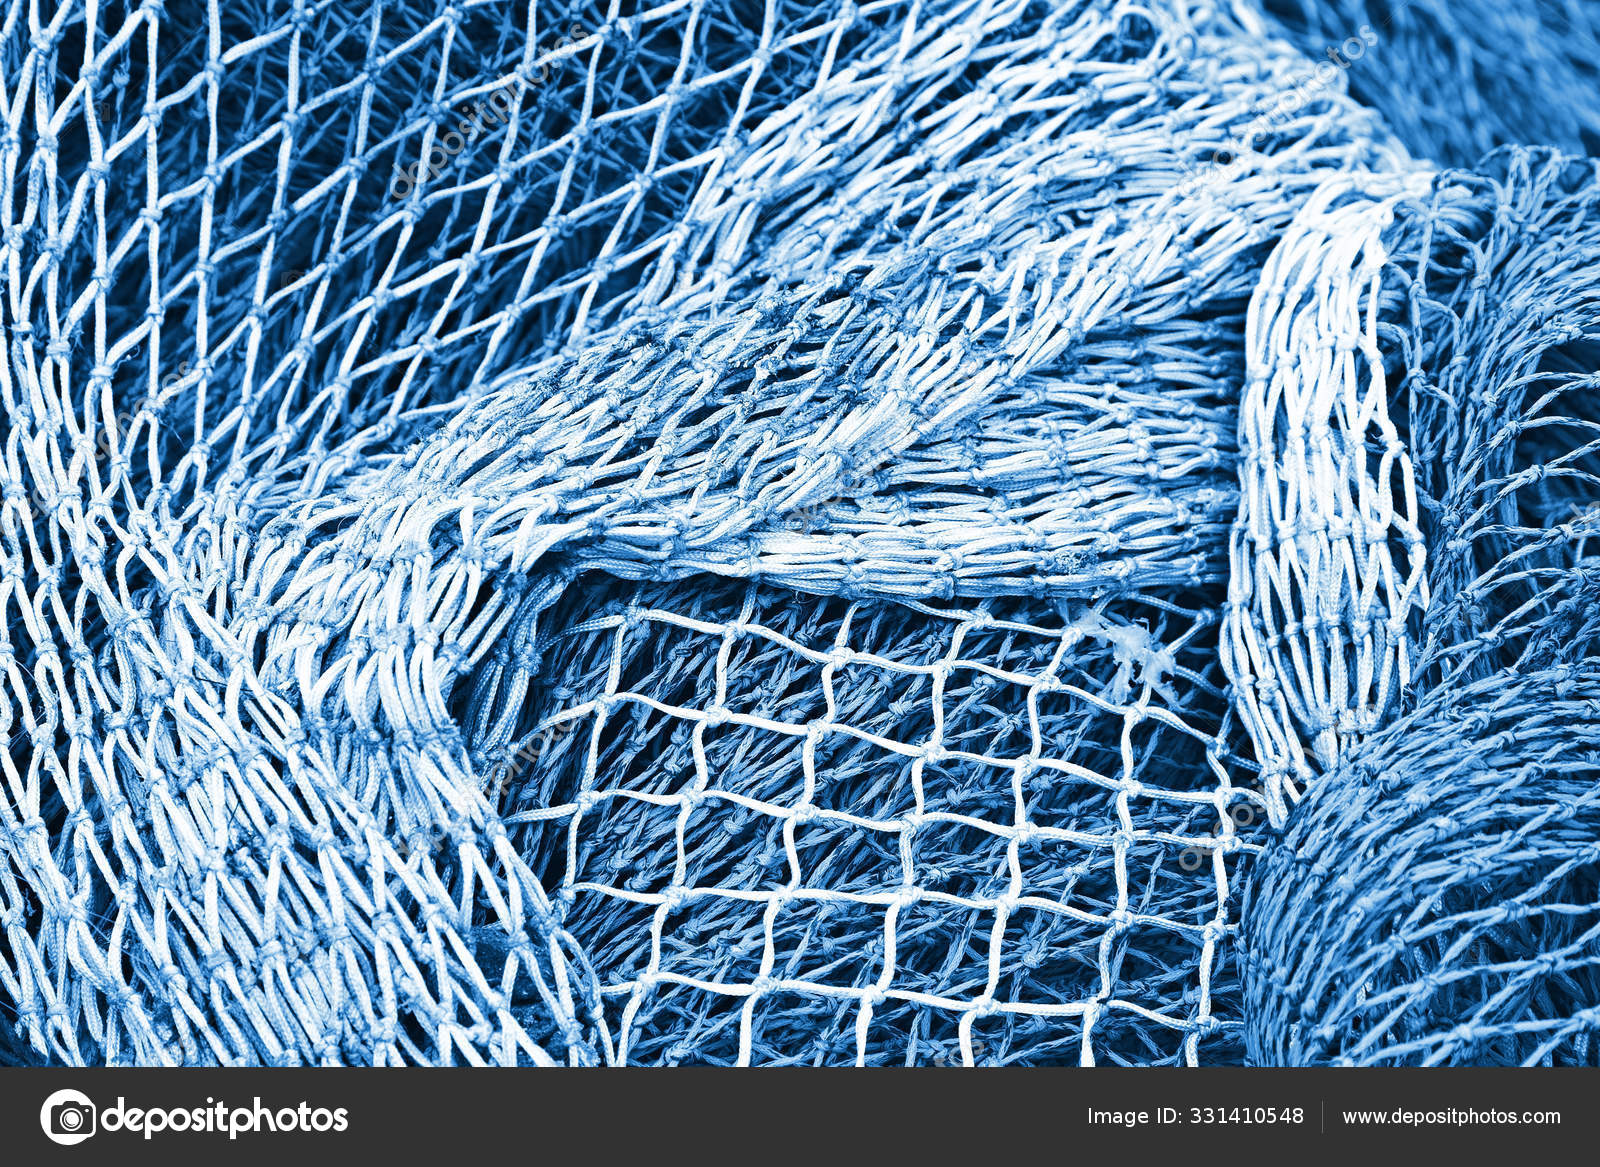 Abstract background with fishing net texture toned in blue monoc